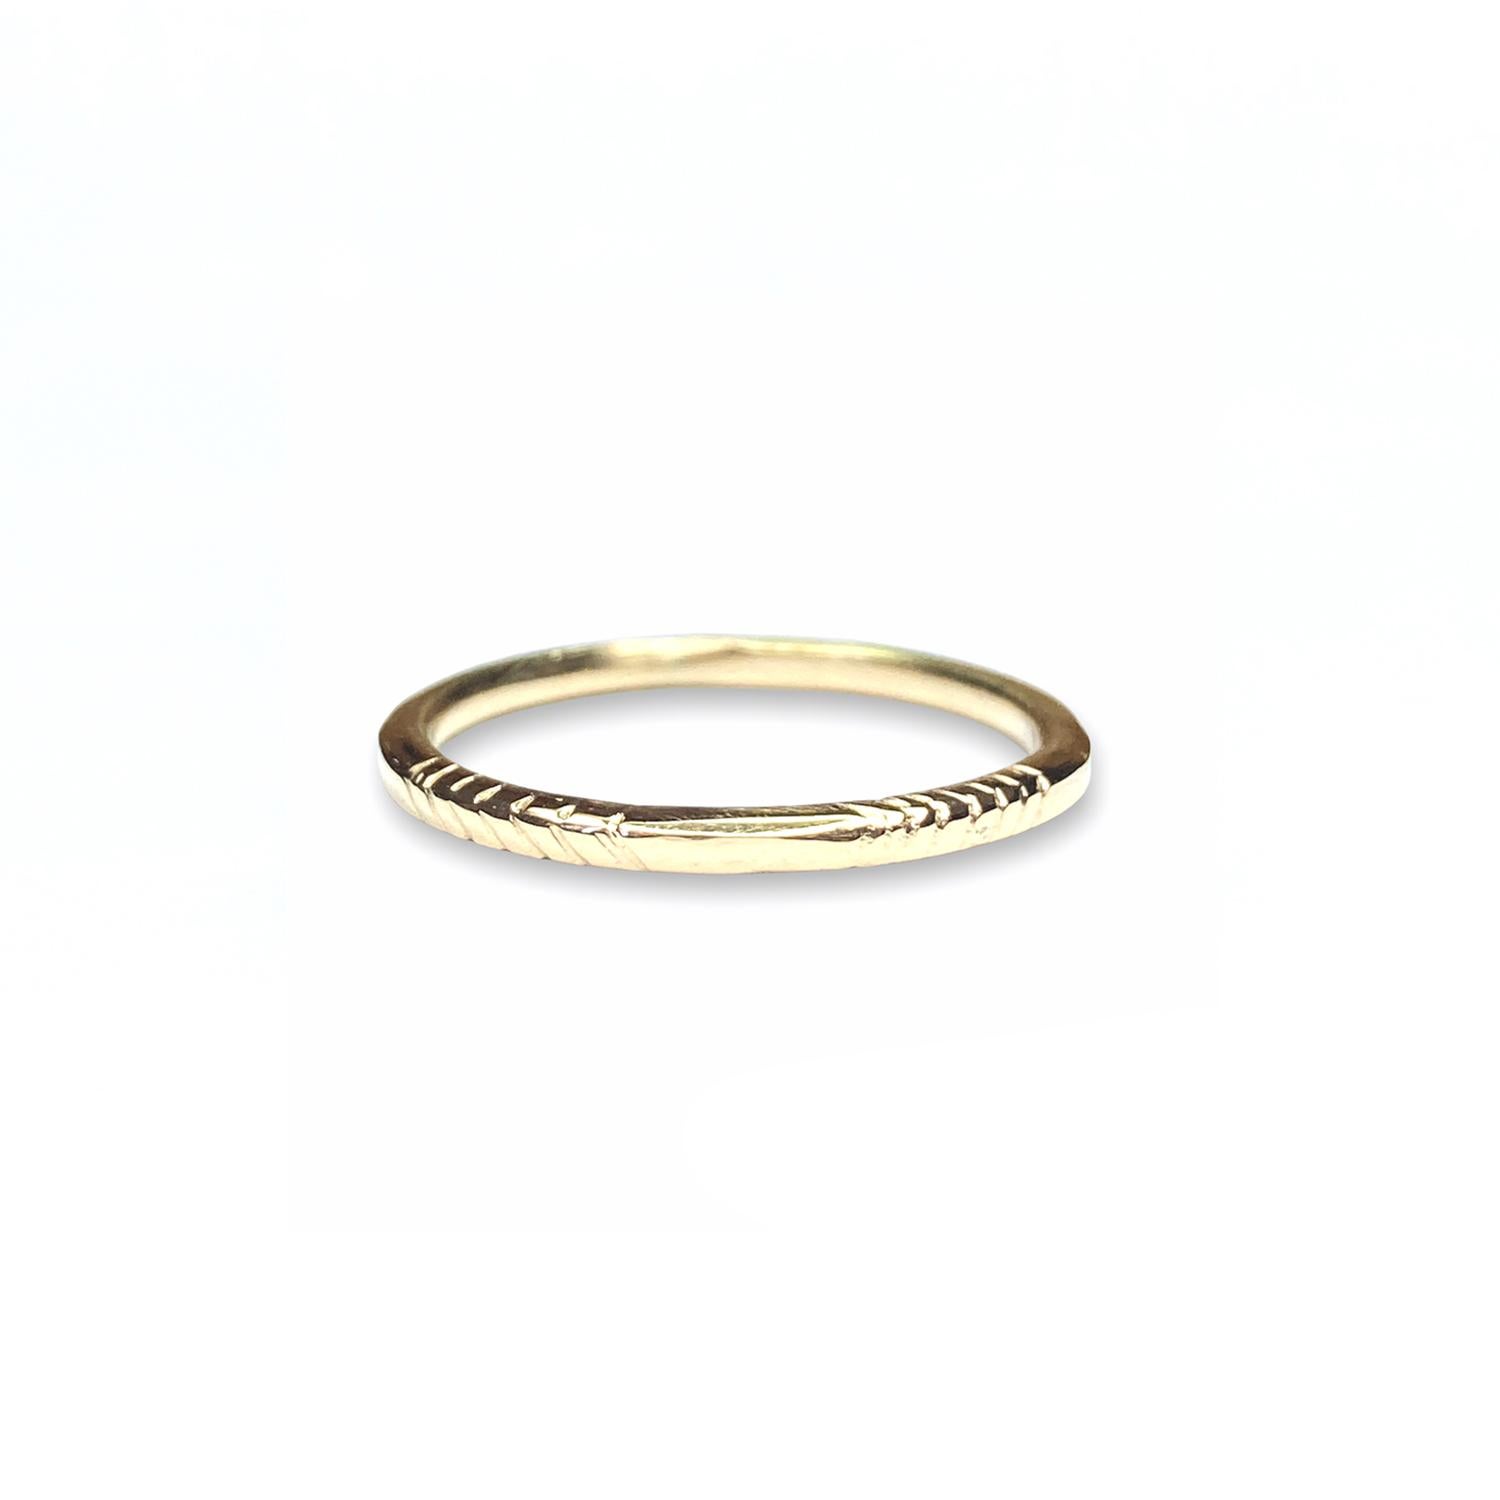 18 Karat Yellow Gold Twine Ring by Deborah Murdoch is part of the Ingrain Collection. The ring band has engraved lines on either side and comes in a polished finish.

Metal: 18 Karat Yellow Gold 
Ring Band Dimensions: Thickness 1.6mm
Ring Size: Made